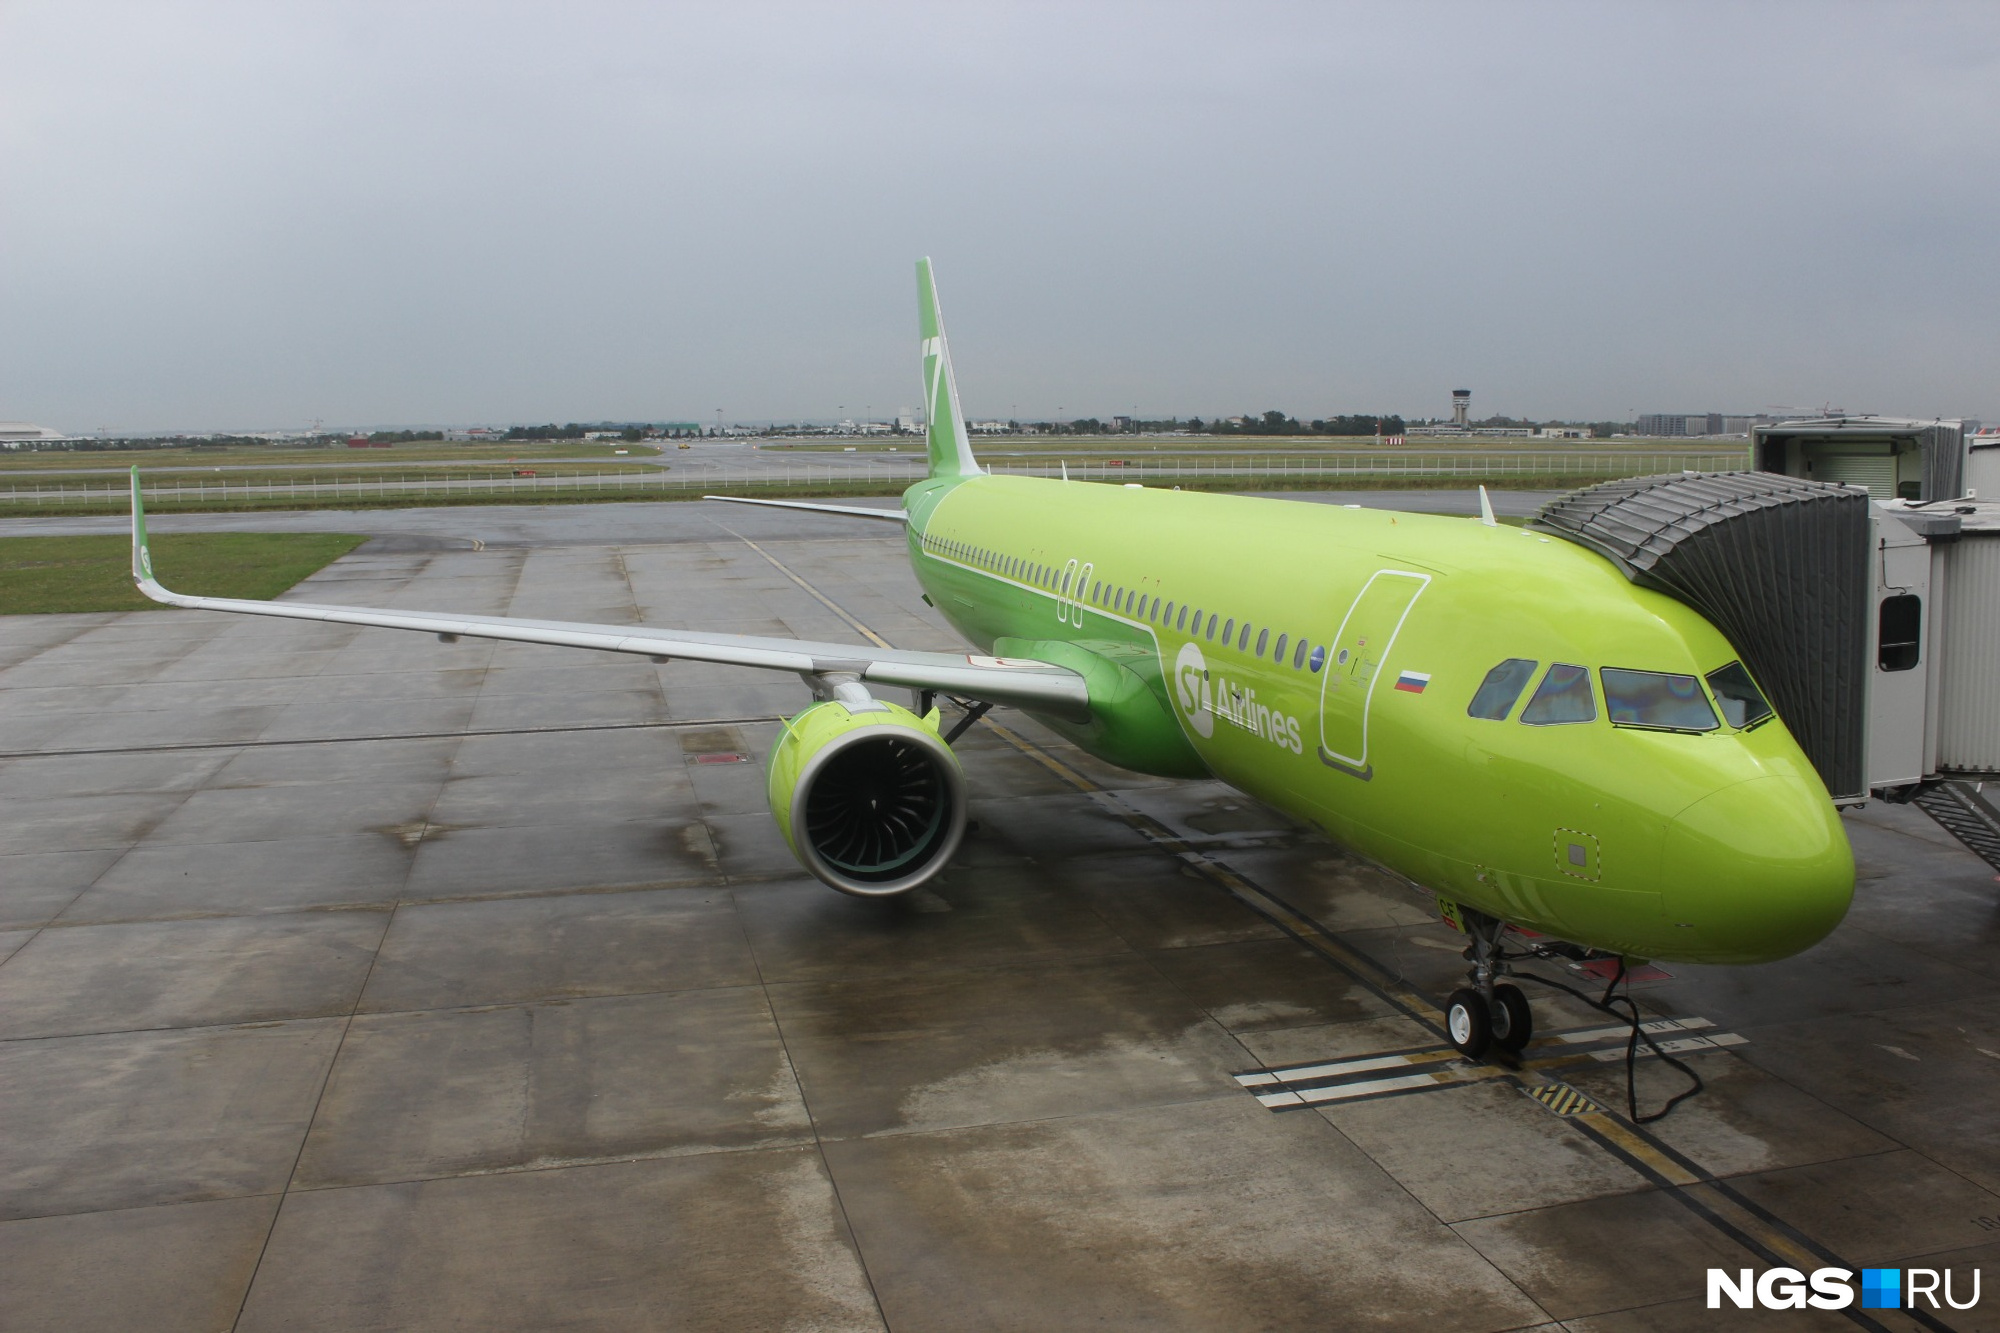 S7 airlines ручная. Airbus a320neo. A320 Neo s7. Самолёт Airbus a320 Neo. S7 самолеты Airbus a320neo.